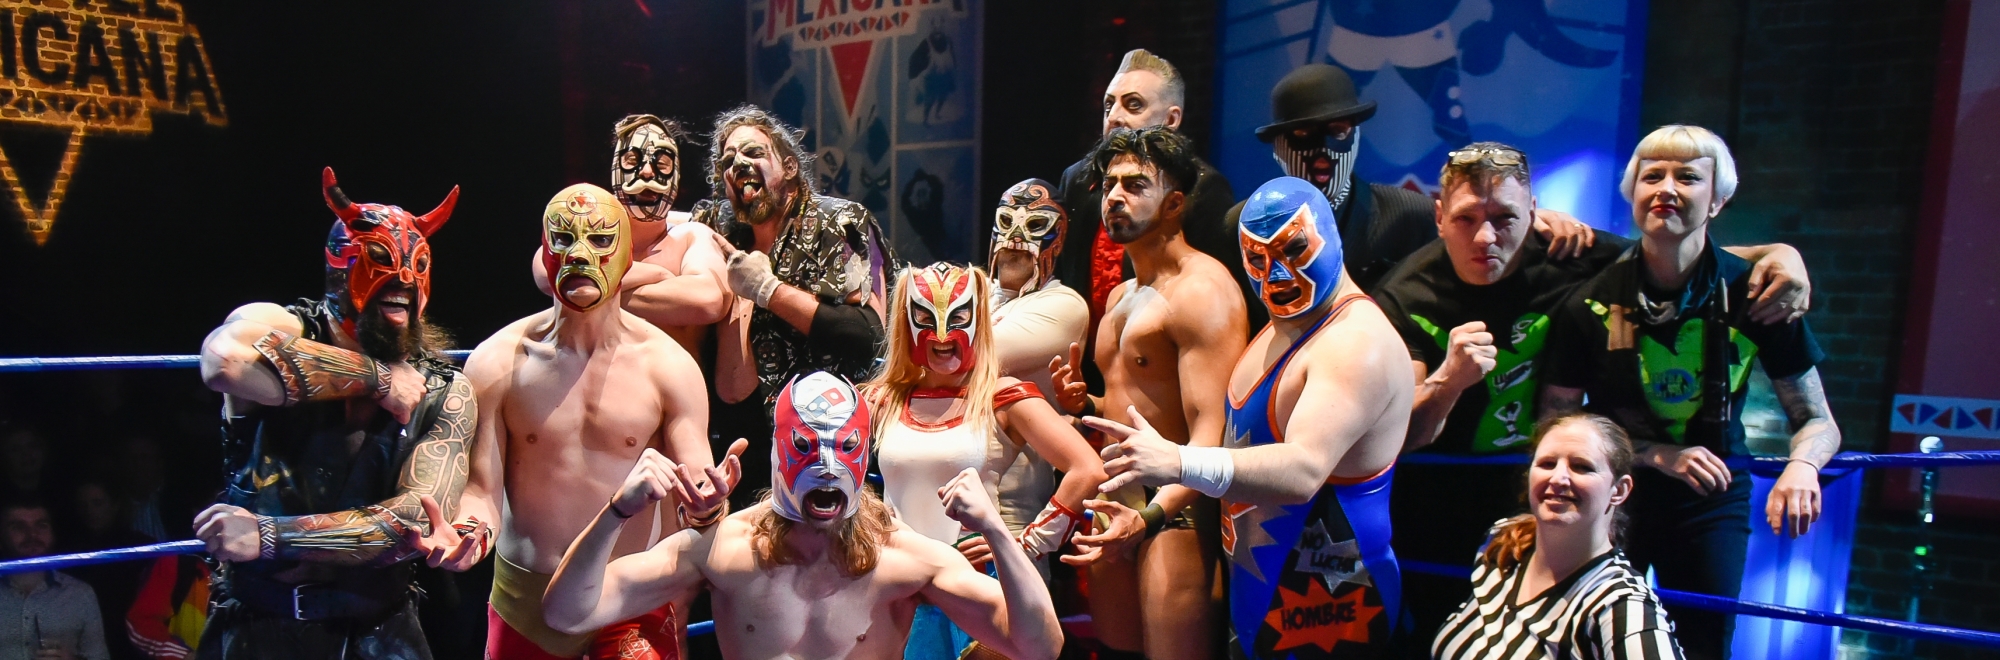 Mexican-wrestling and pizza: The ultimate tag team from One Green Bean